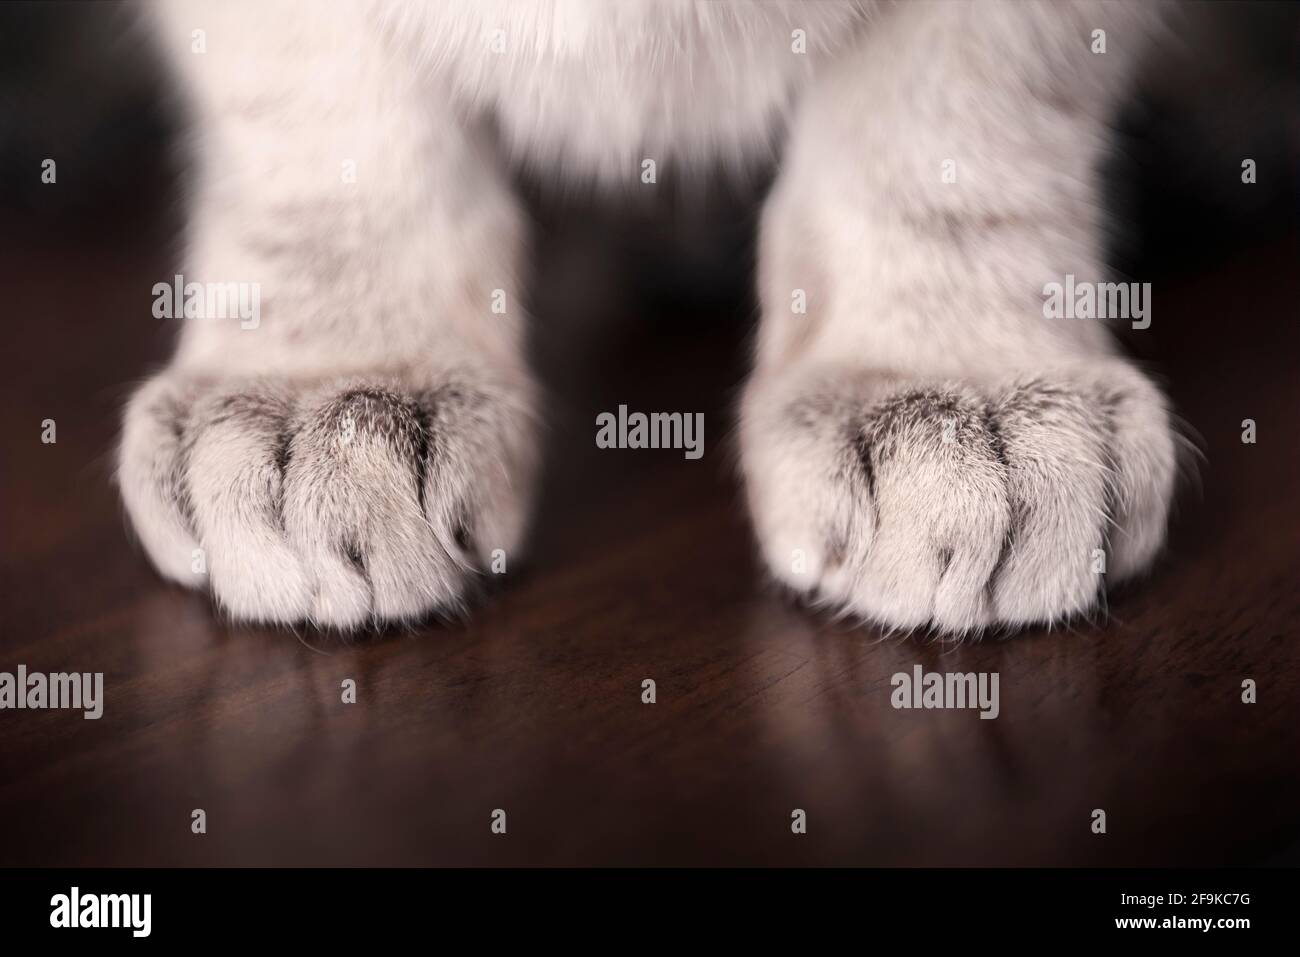 Tabby Point Siamese Cat Paws close up detail. White feet on a dark surface. Shallow Depth of Field Stock Photo